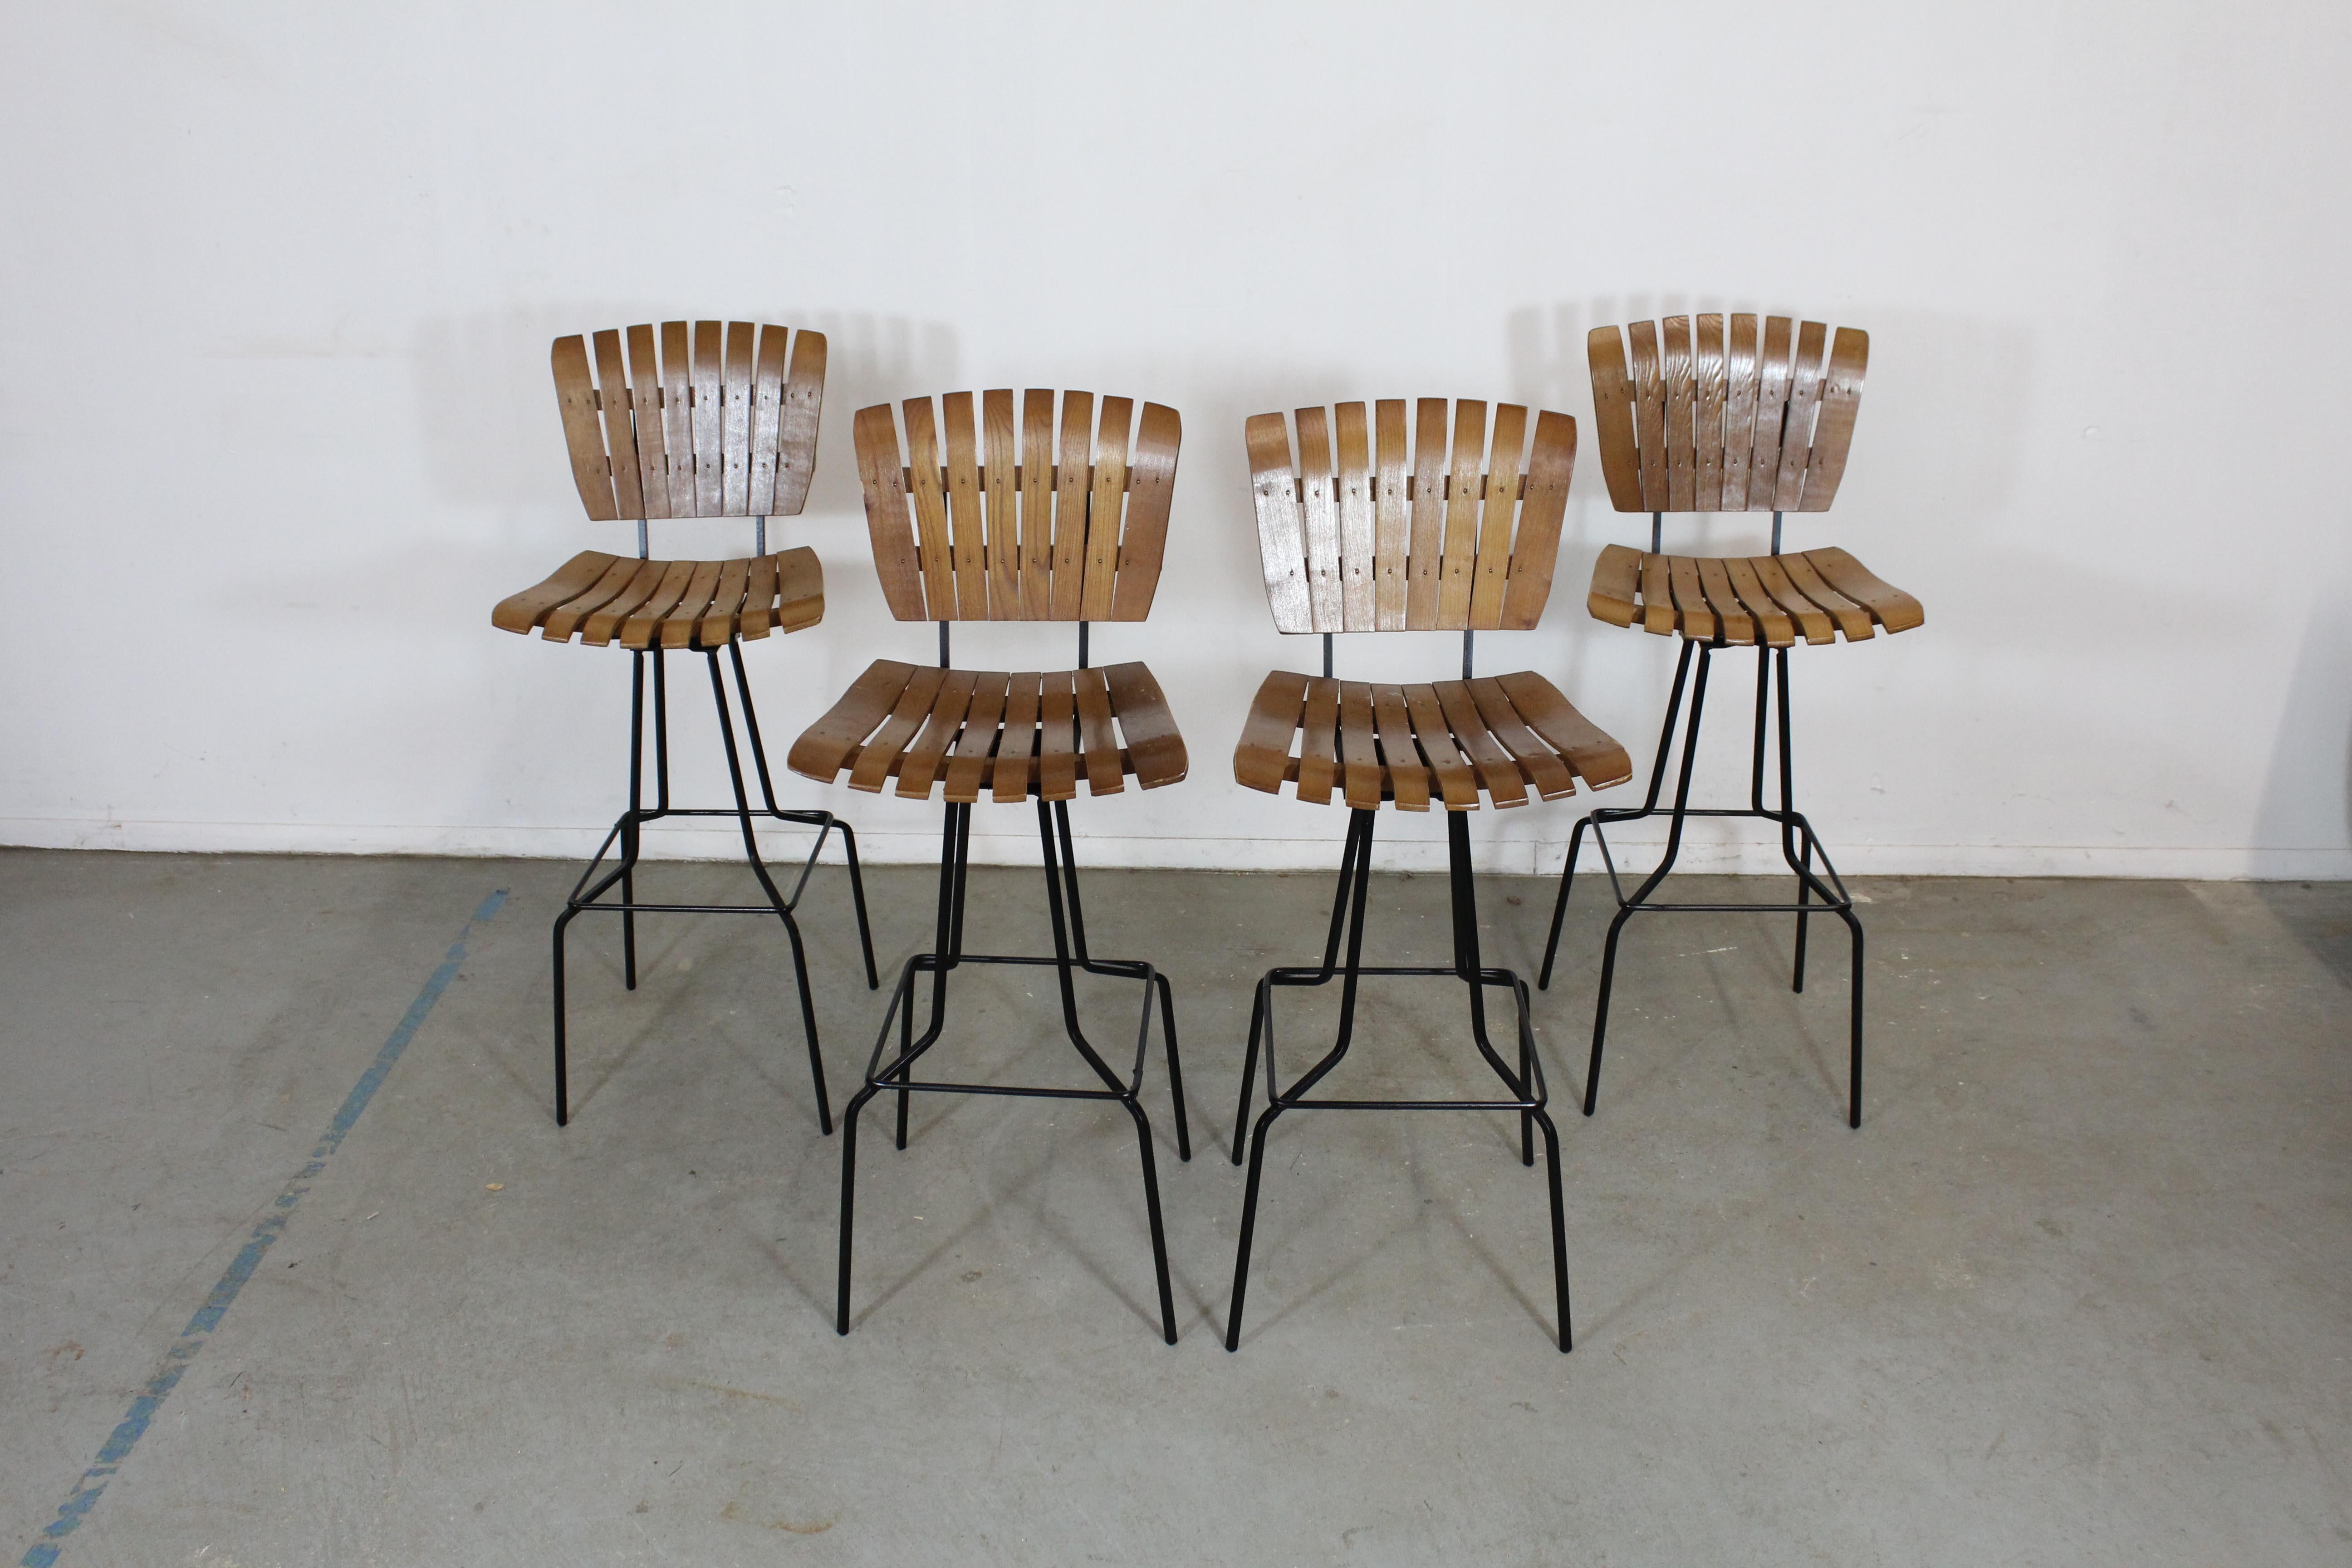 Set of 4 mid-century Arthur Umanoff slat style bar stools

Offered is a great set of 4 mid-century Arthur Umanoff slat style bar stools. They have the simple lines and design seen in this time period. They are in good condition for their age